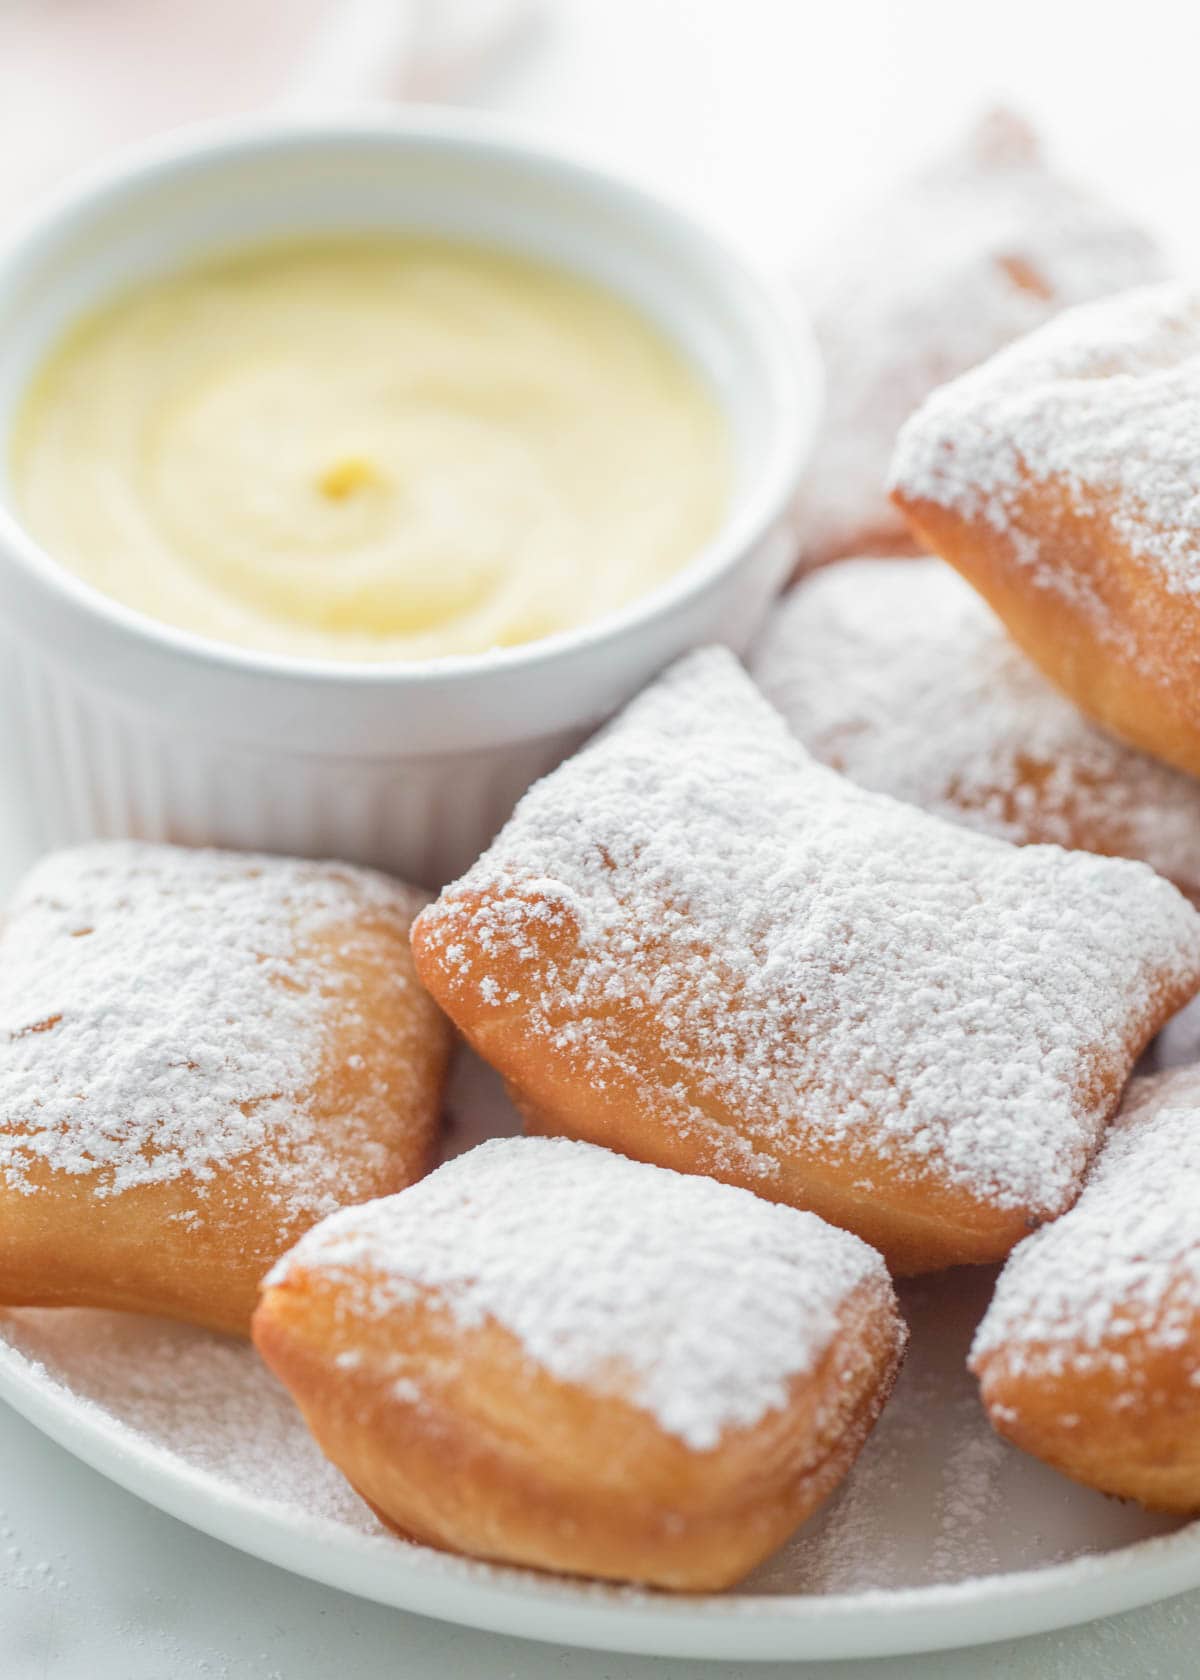 Custard dish filled with crème anglaise and served with powder sugar covered beignets